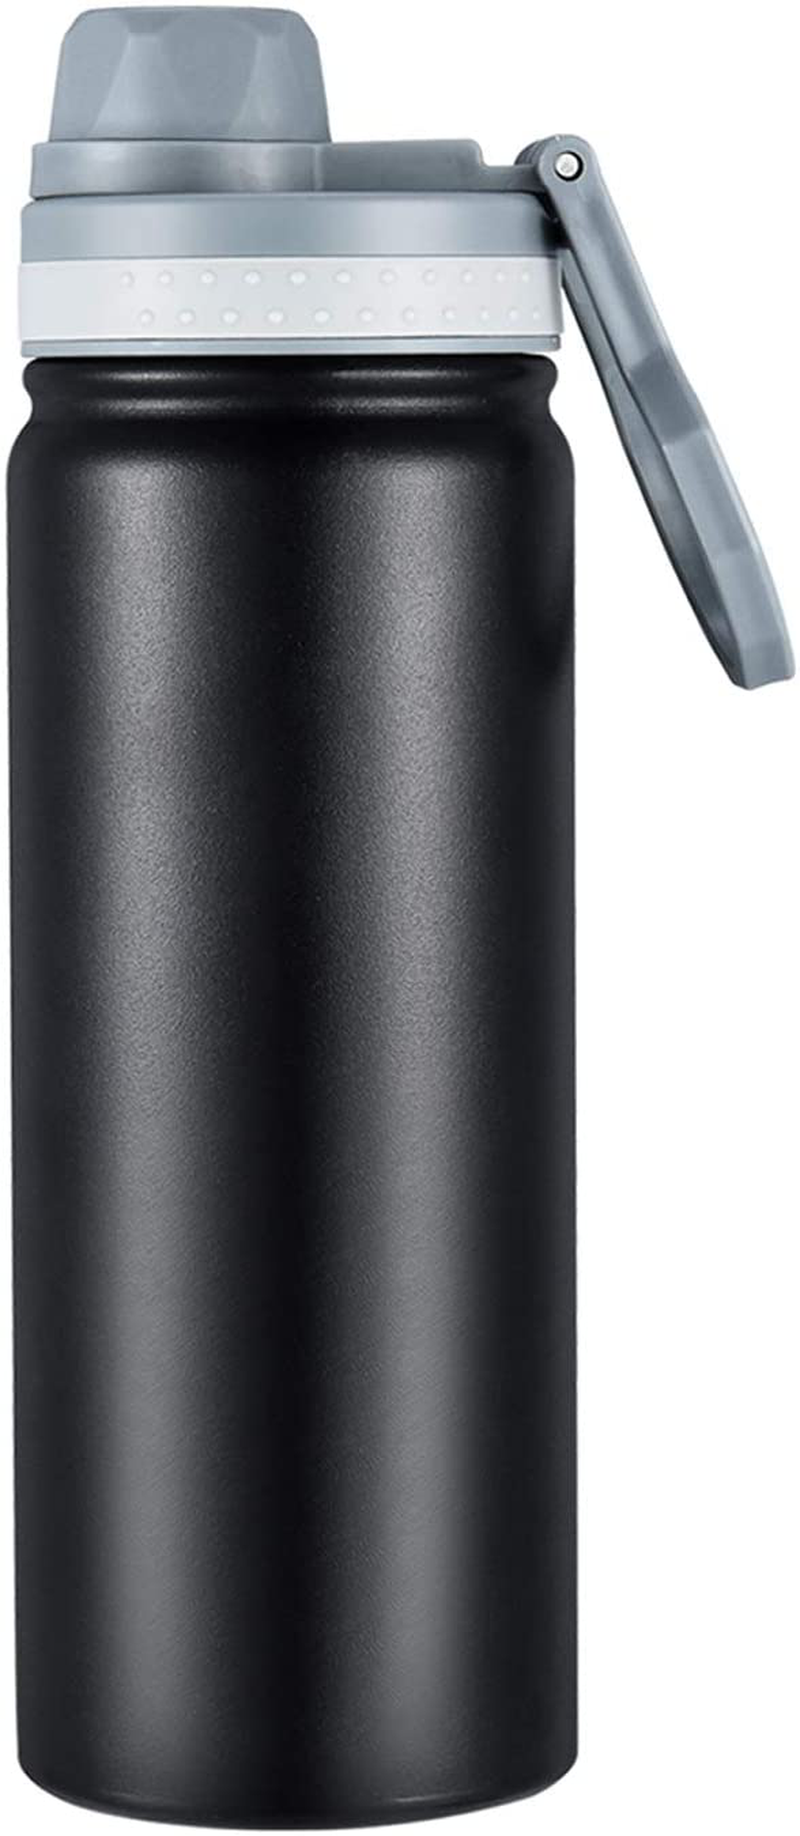 Stainless Steel Vacuum Insulated Water Bottle,Wide Mouth Metal Water Bottle,Black Double Wall with Leak Proof Spout Lid, BPA Free,18oz